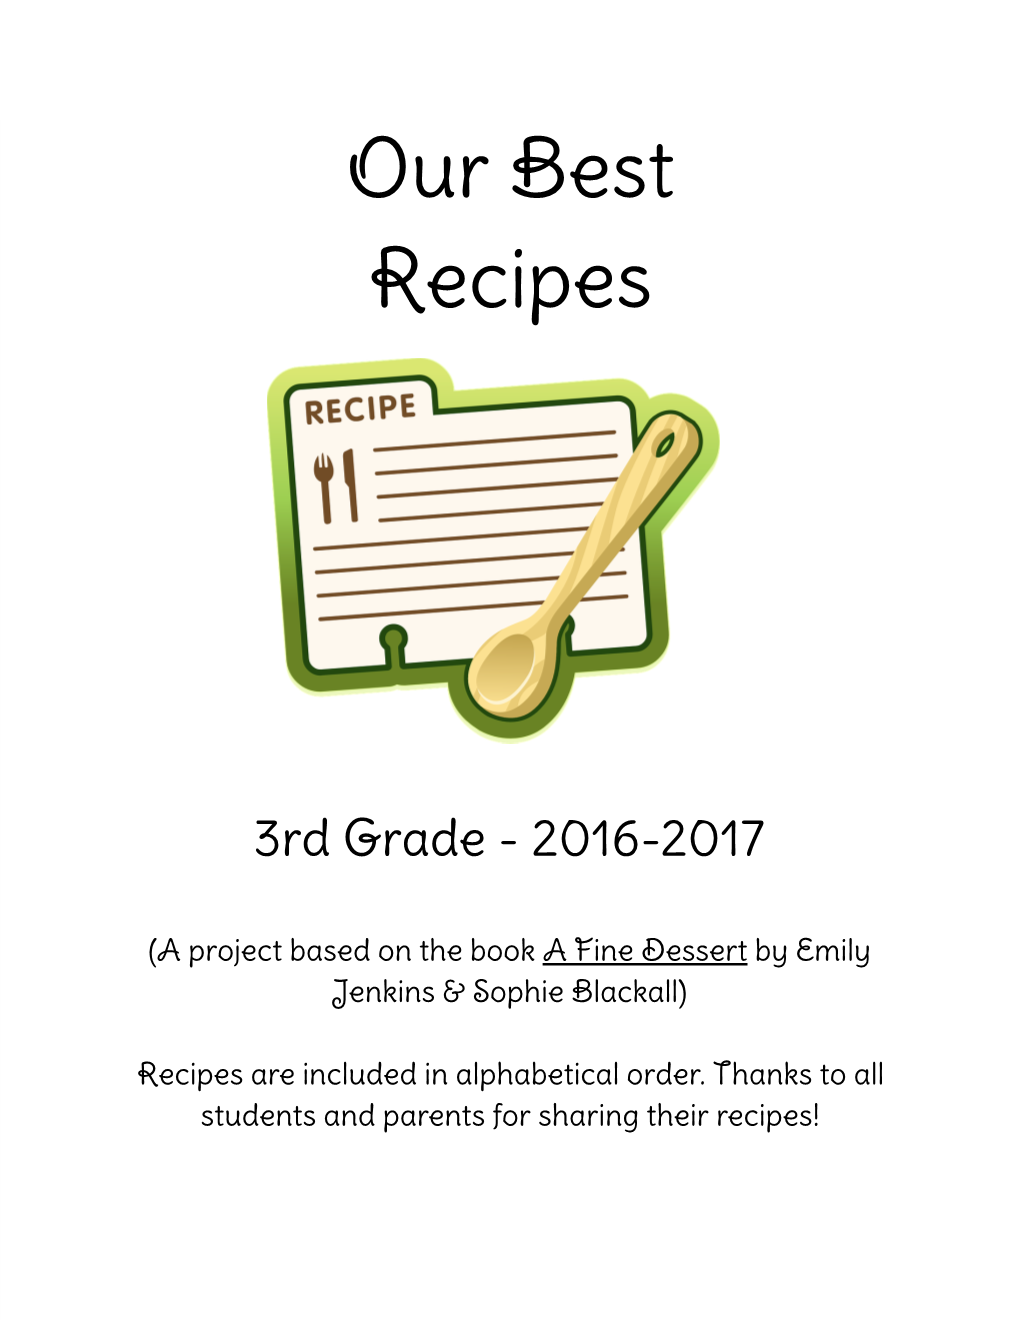 Our Best Recipes